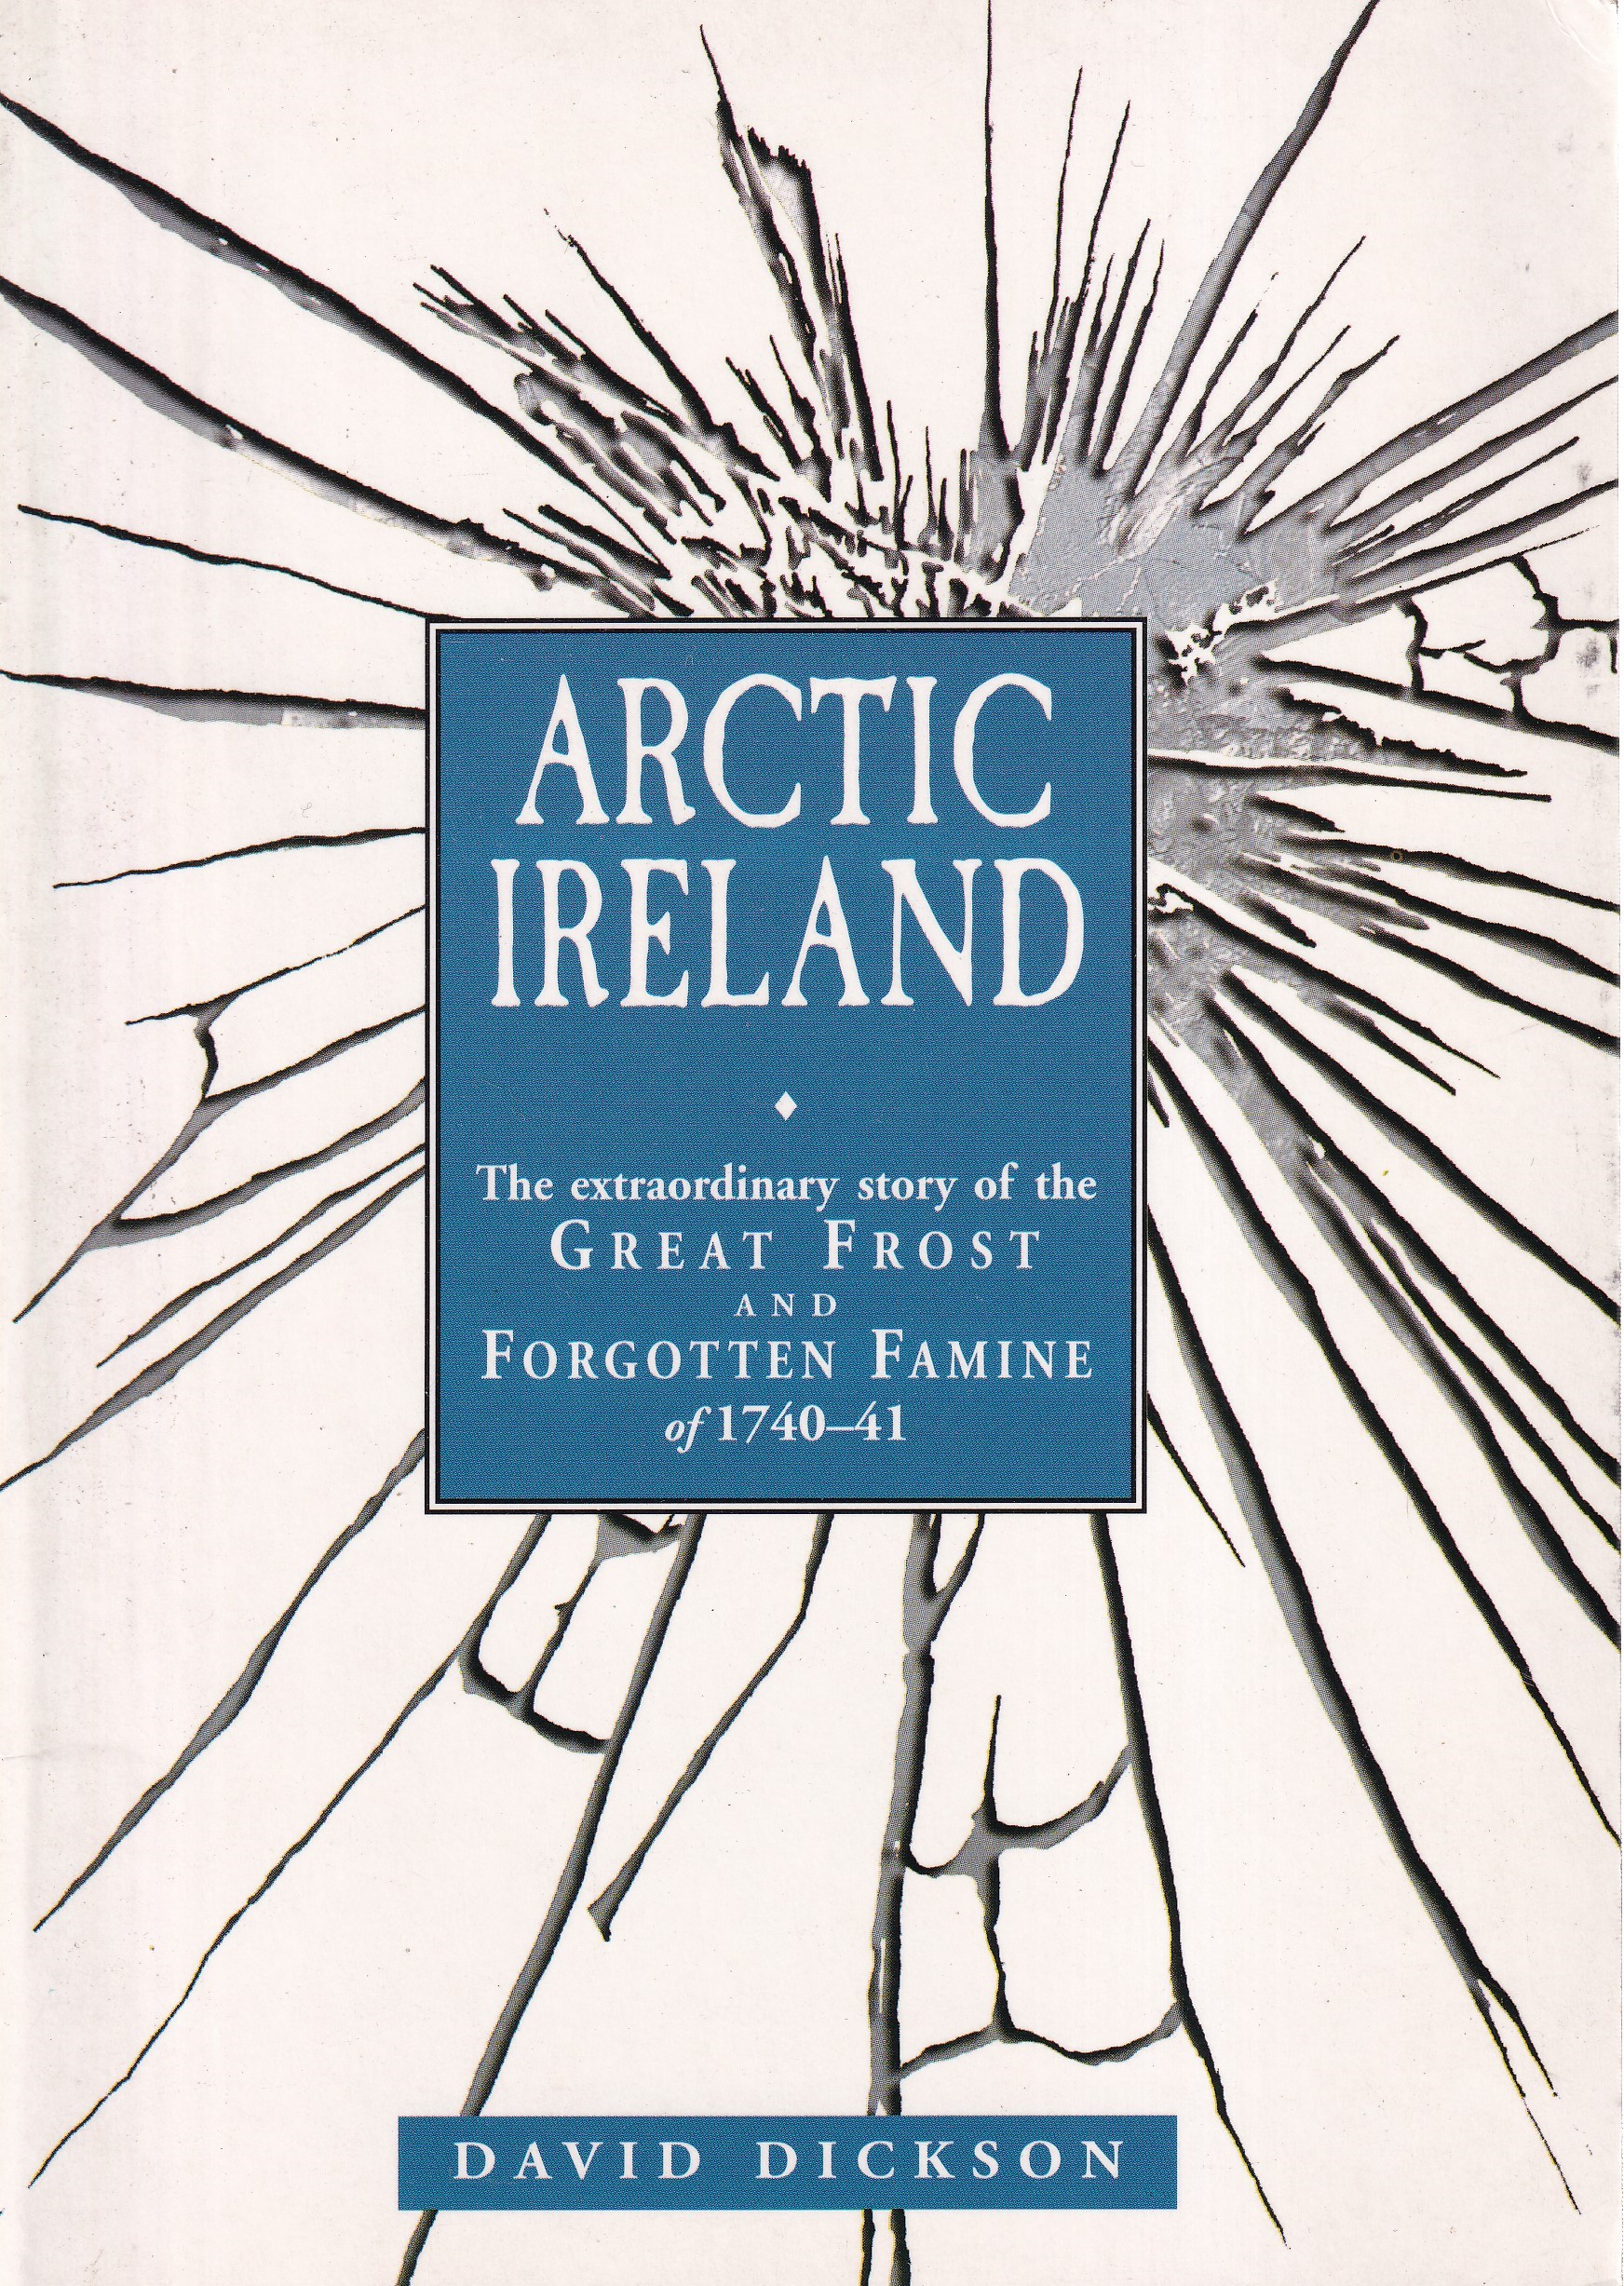 Arctic Ireland: The Extraordinary Story of the Great Frost and Forgotten Famine of 1740-41 | David Dickson | Charlie Byrne's